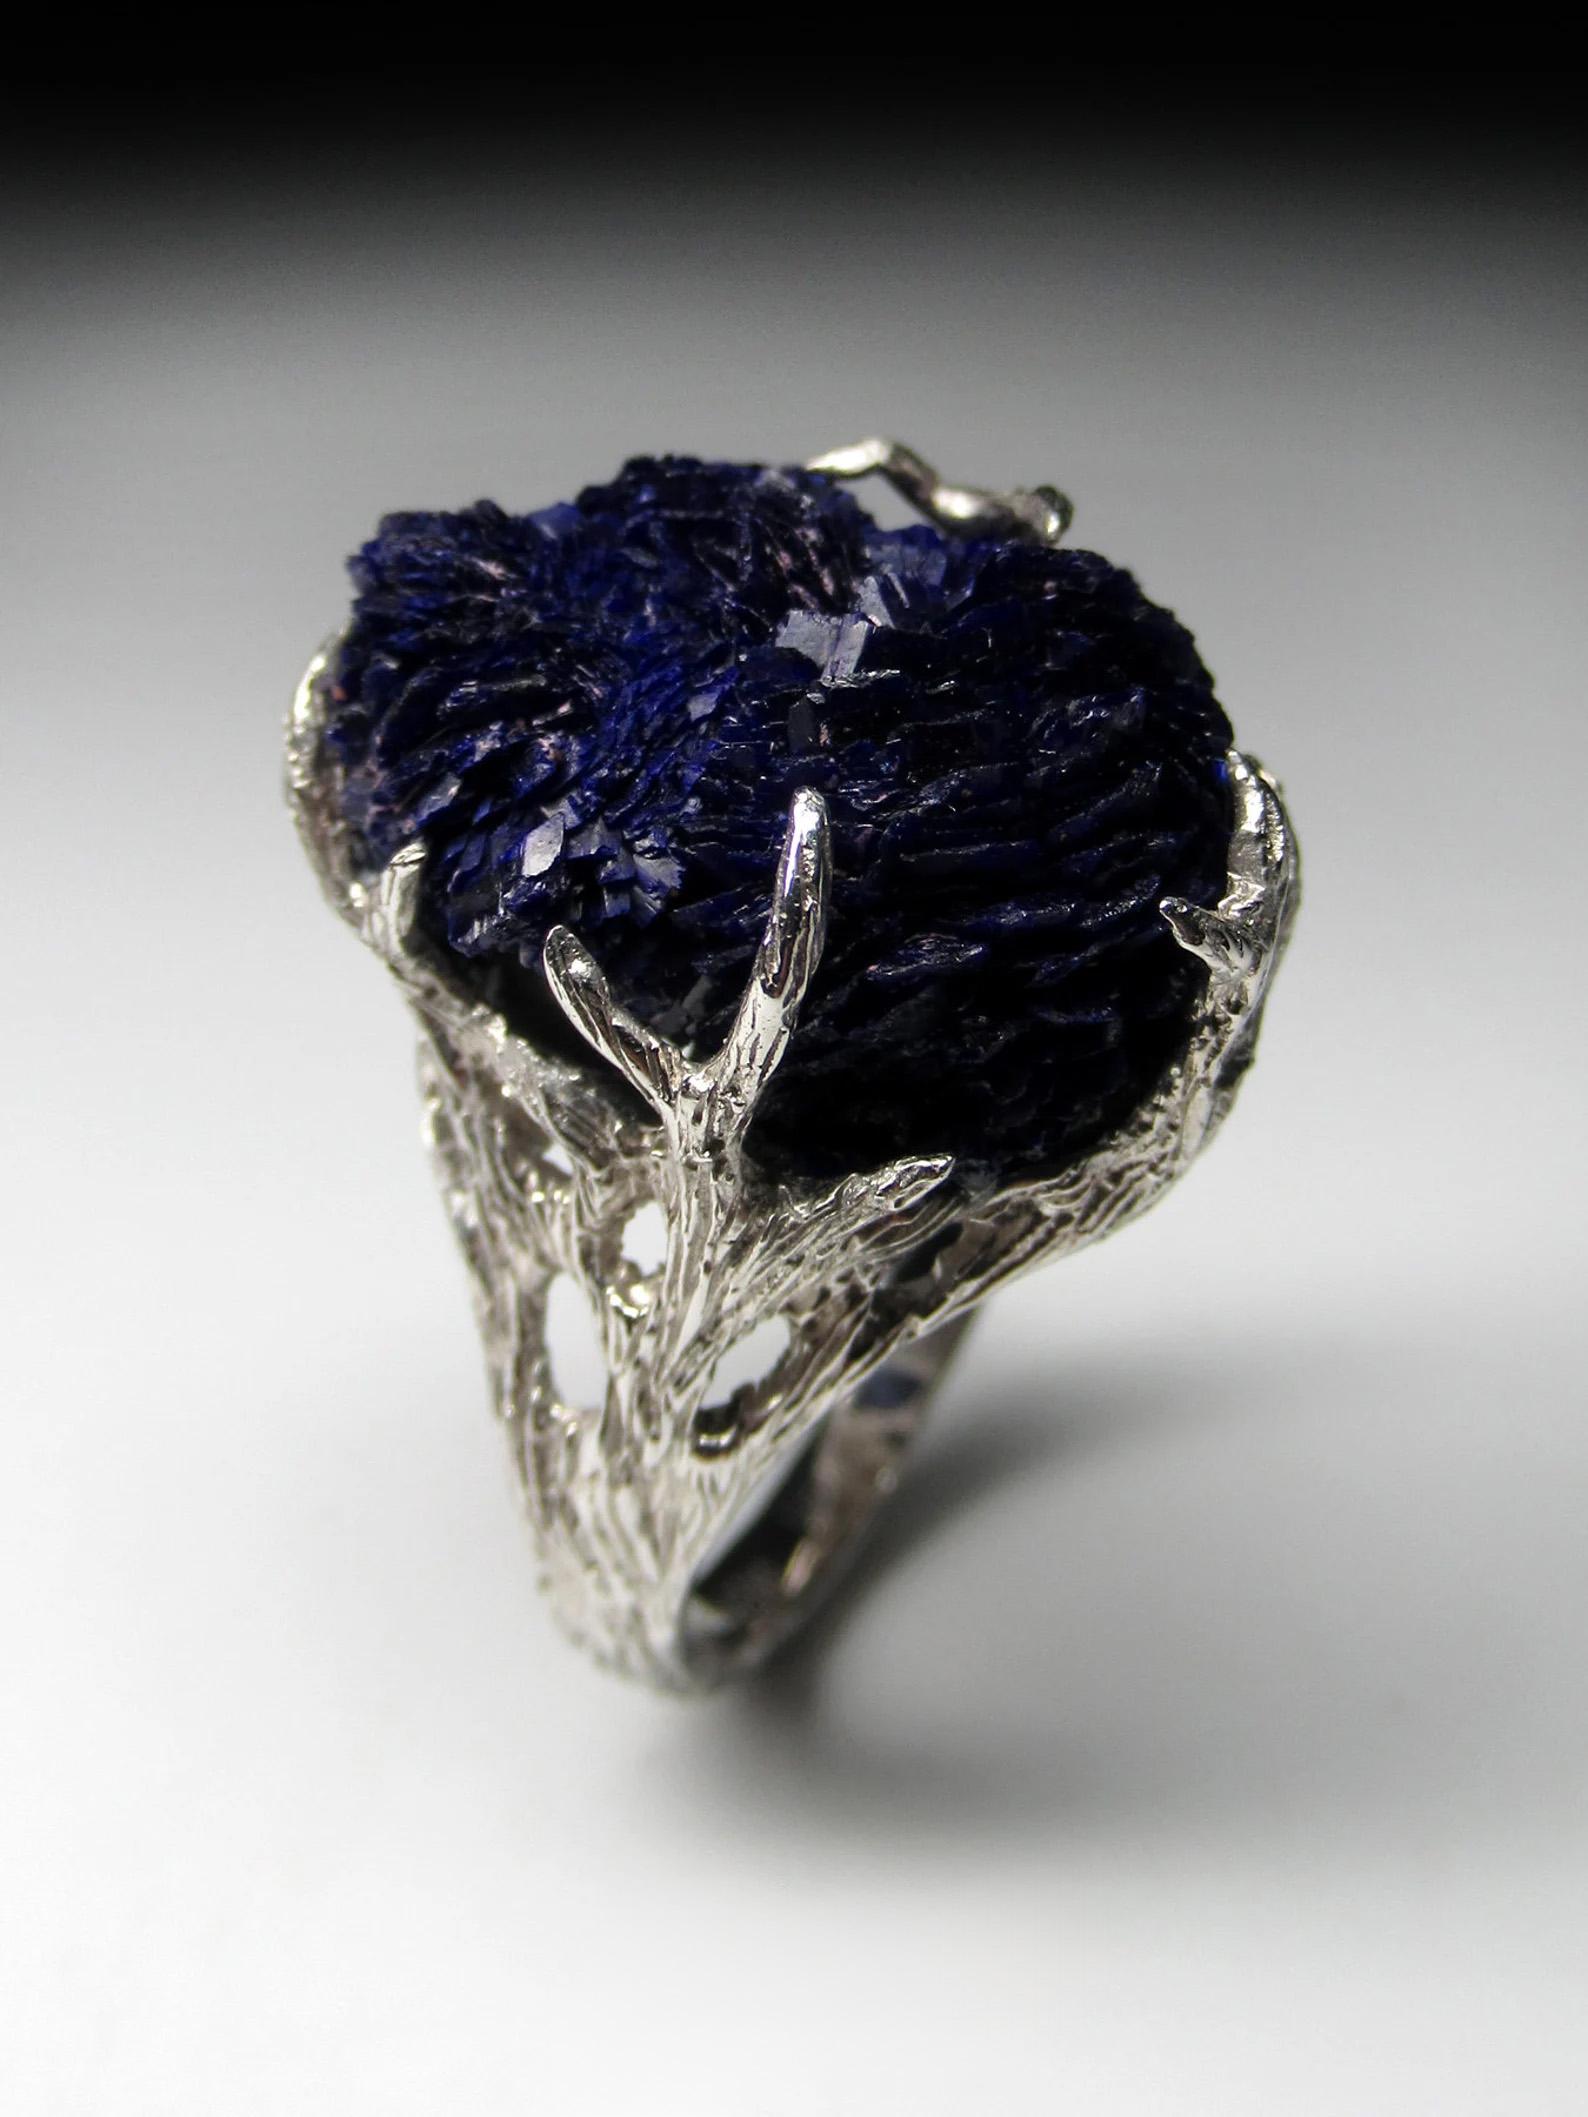 Oval Cut Azurite Silver Ring Amazing Rare Natural Blue Raw Azurite Crystals Gemstone  For Sale